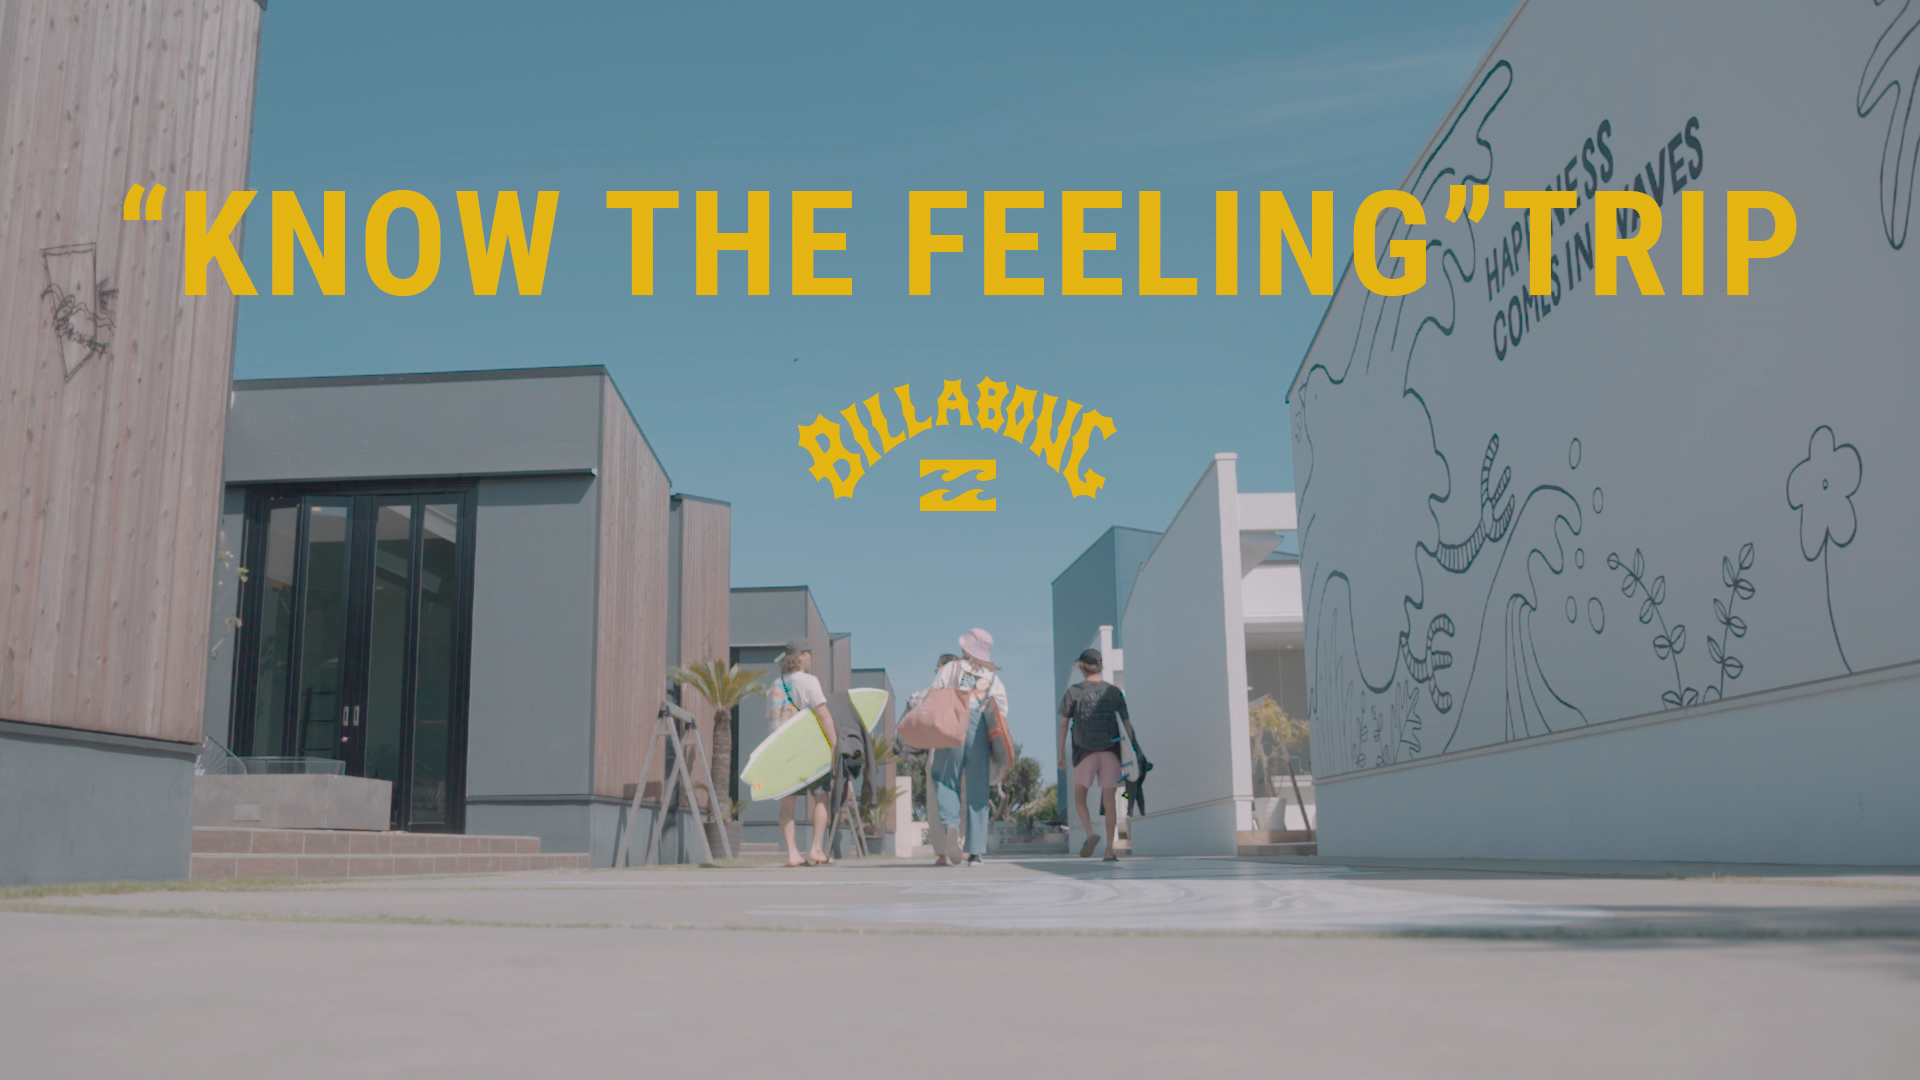 Billabong Know The Feeling Trip Supported By Ttneがドロップ Surfin Life サーフィン ライフ